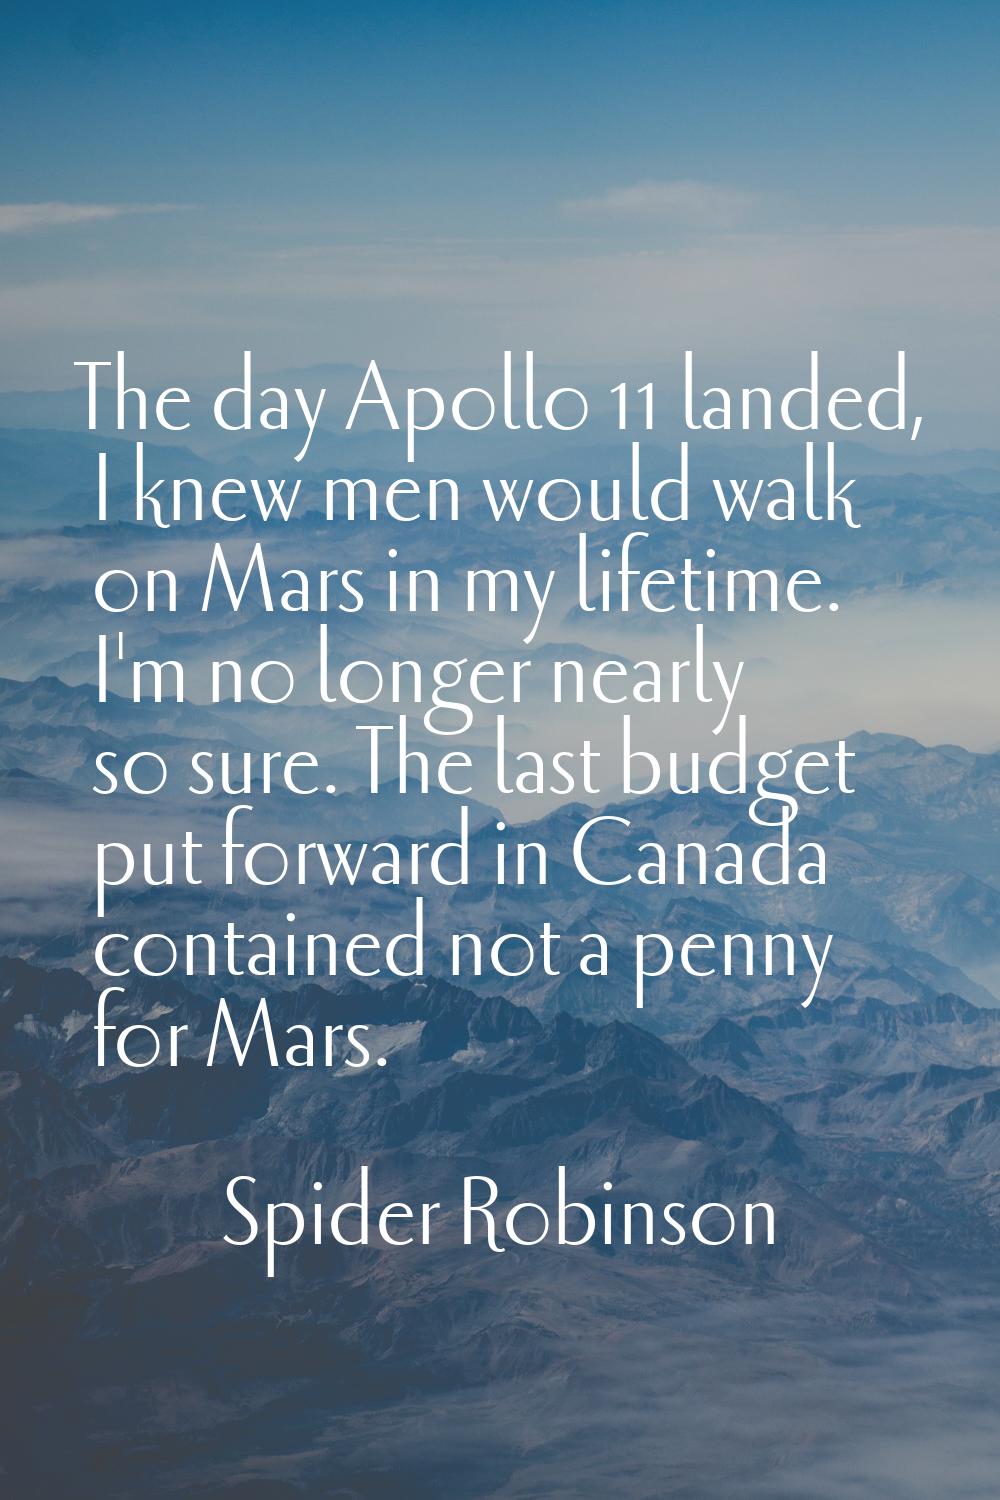 The day Apollo 11 landed, I knew men would walk on Mars in my lifetime. I'm no longer nearly so sur